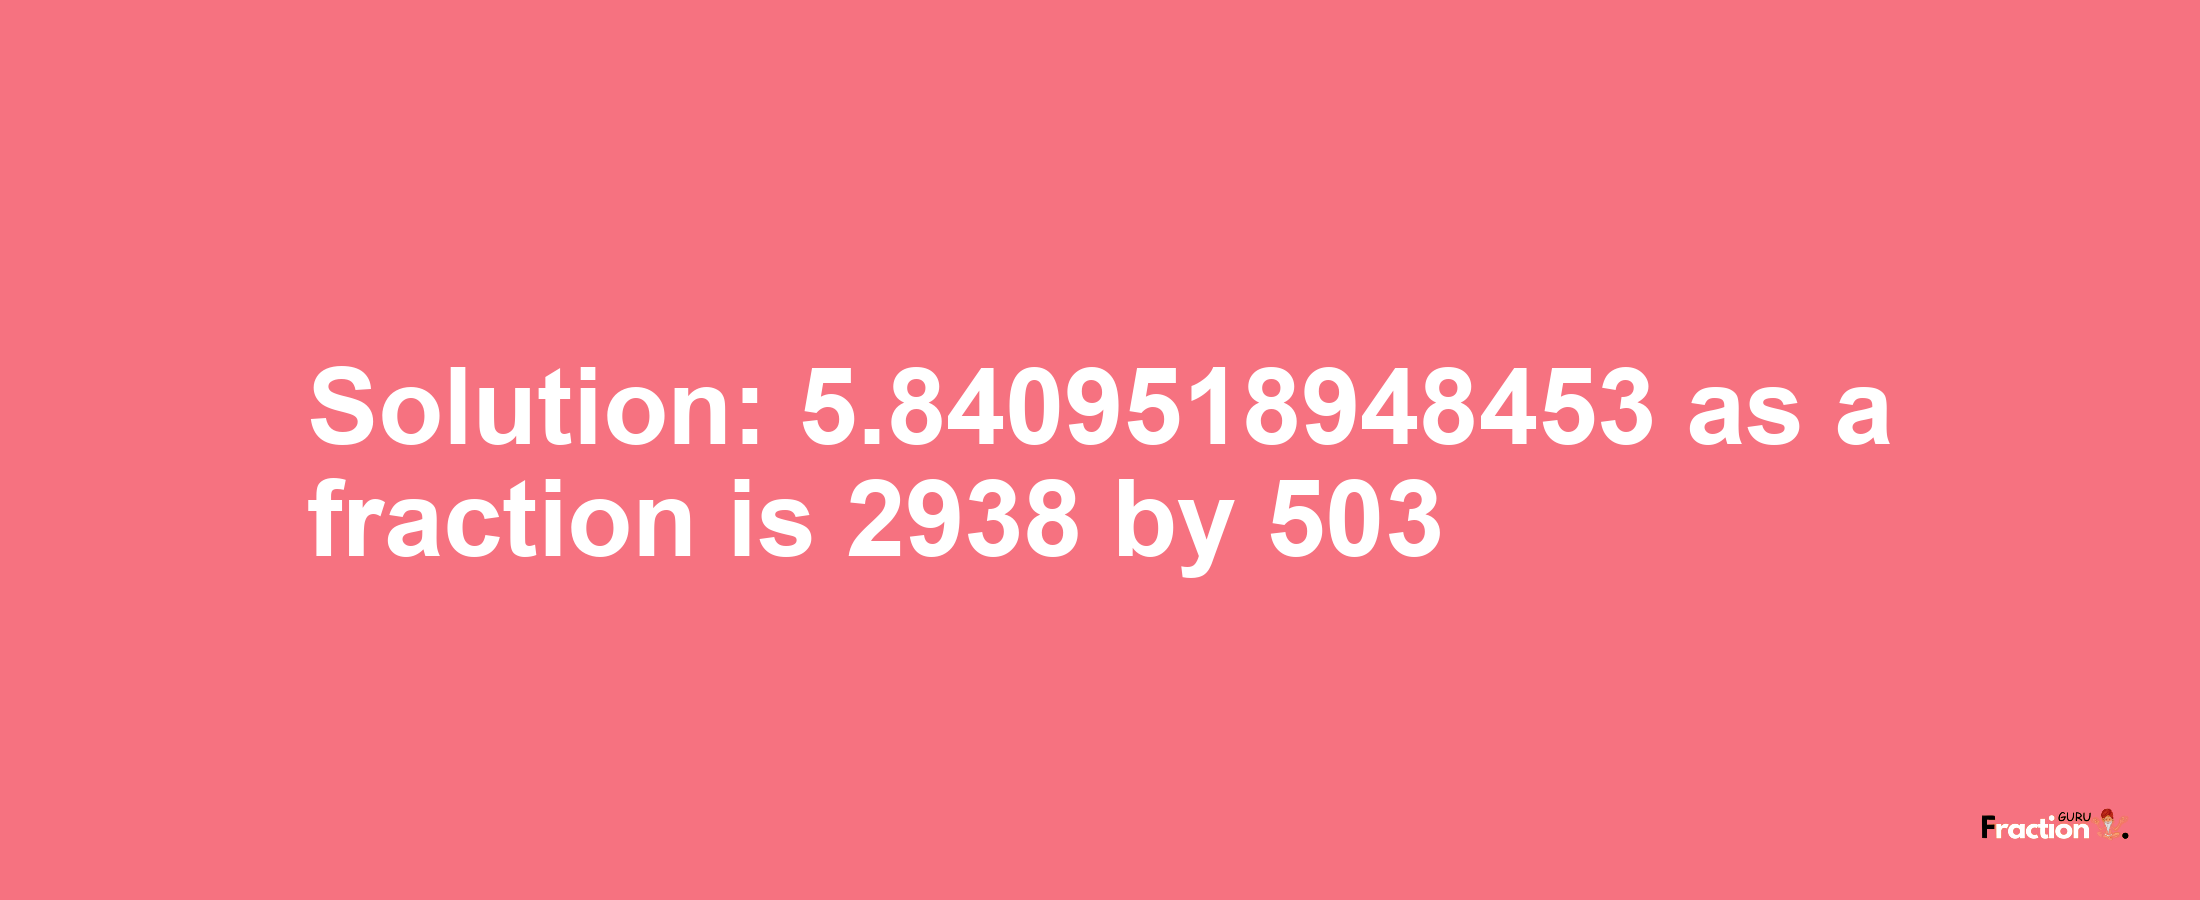 Solution:5.8409518948453 as a fraction is 2938/503